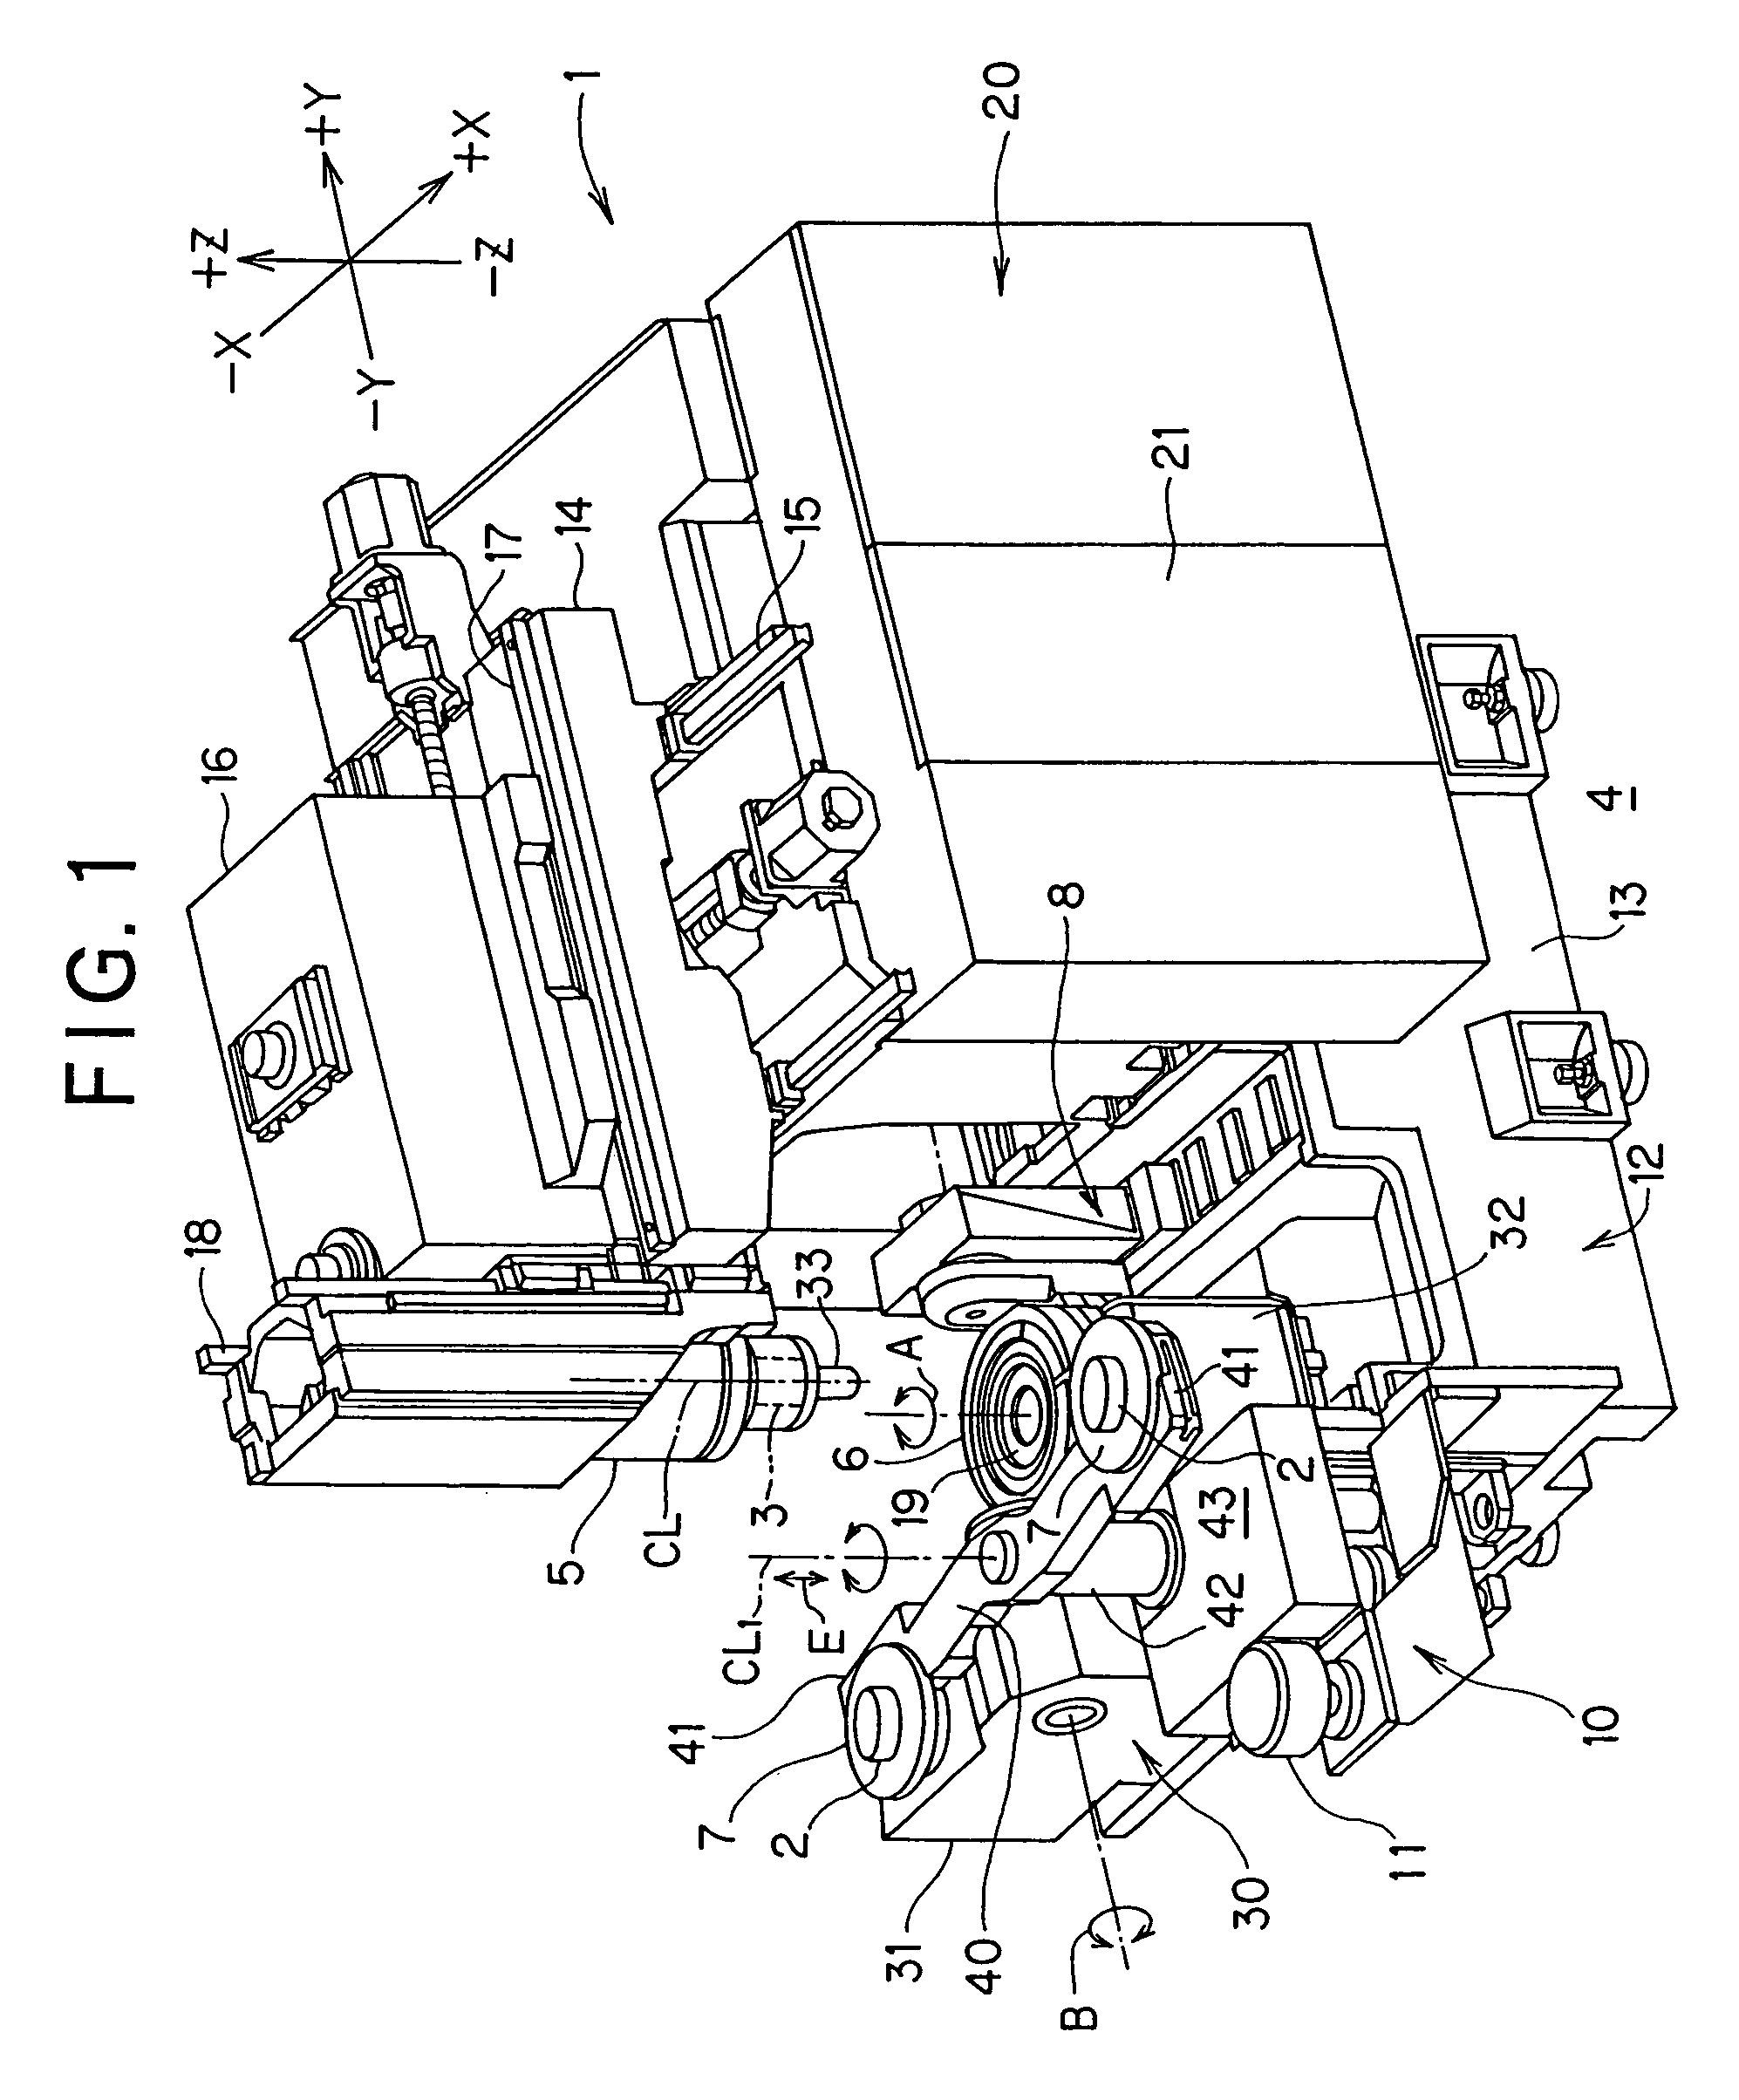 Machine tool and pallet changer for machine tool